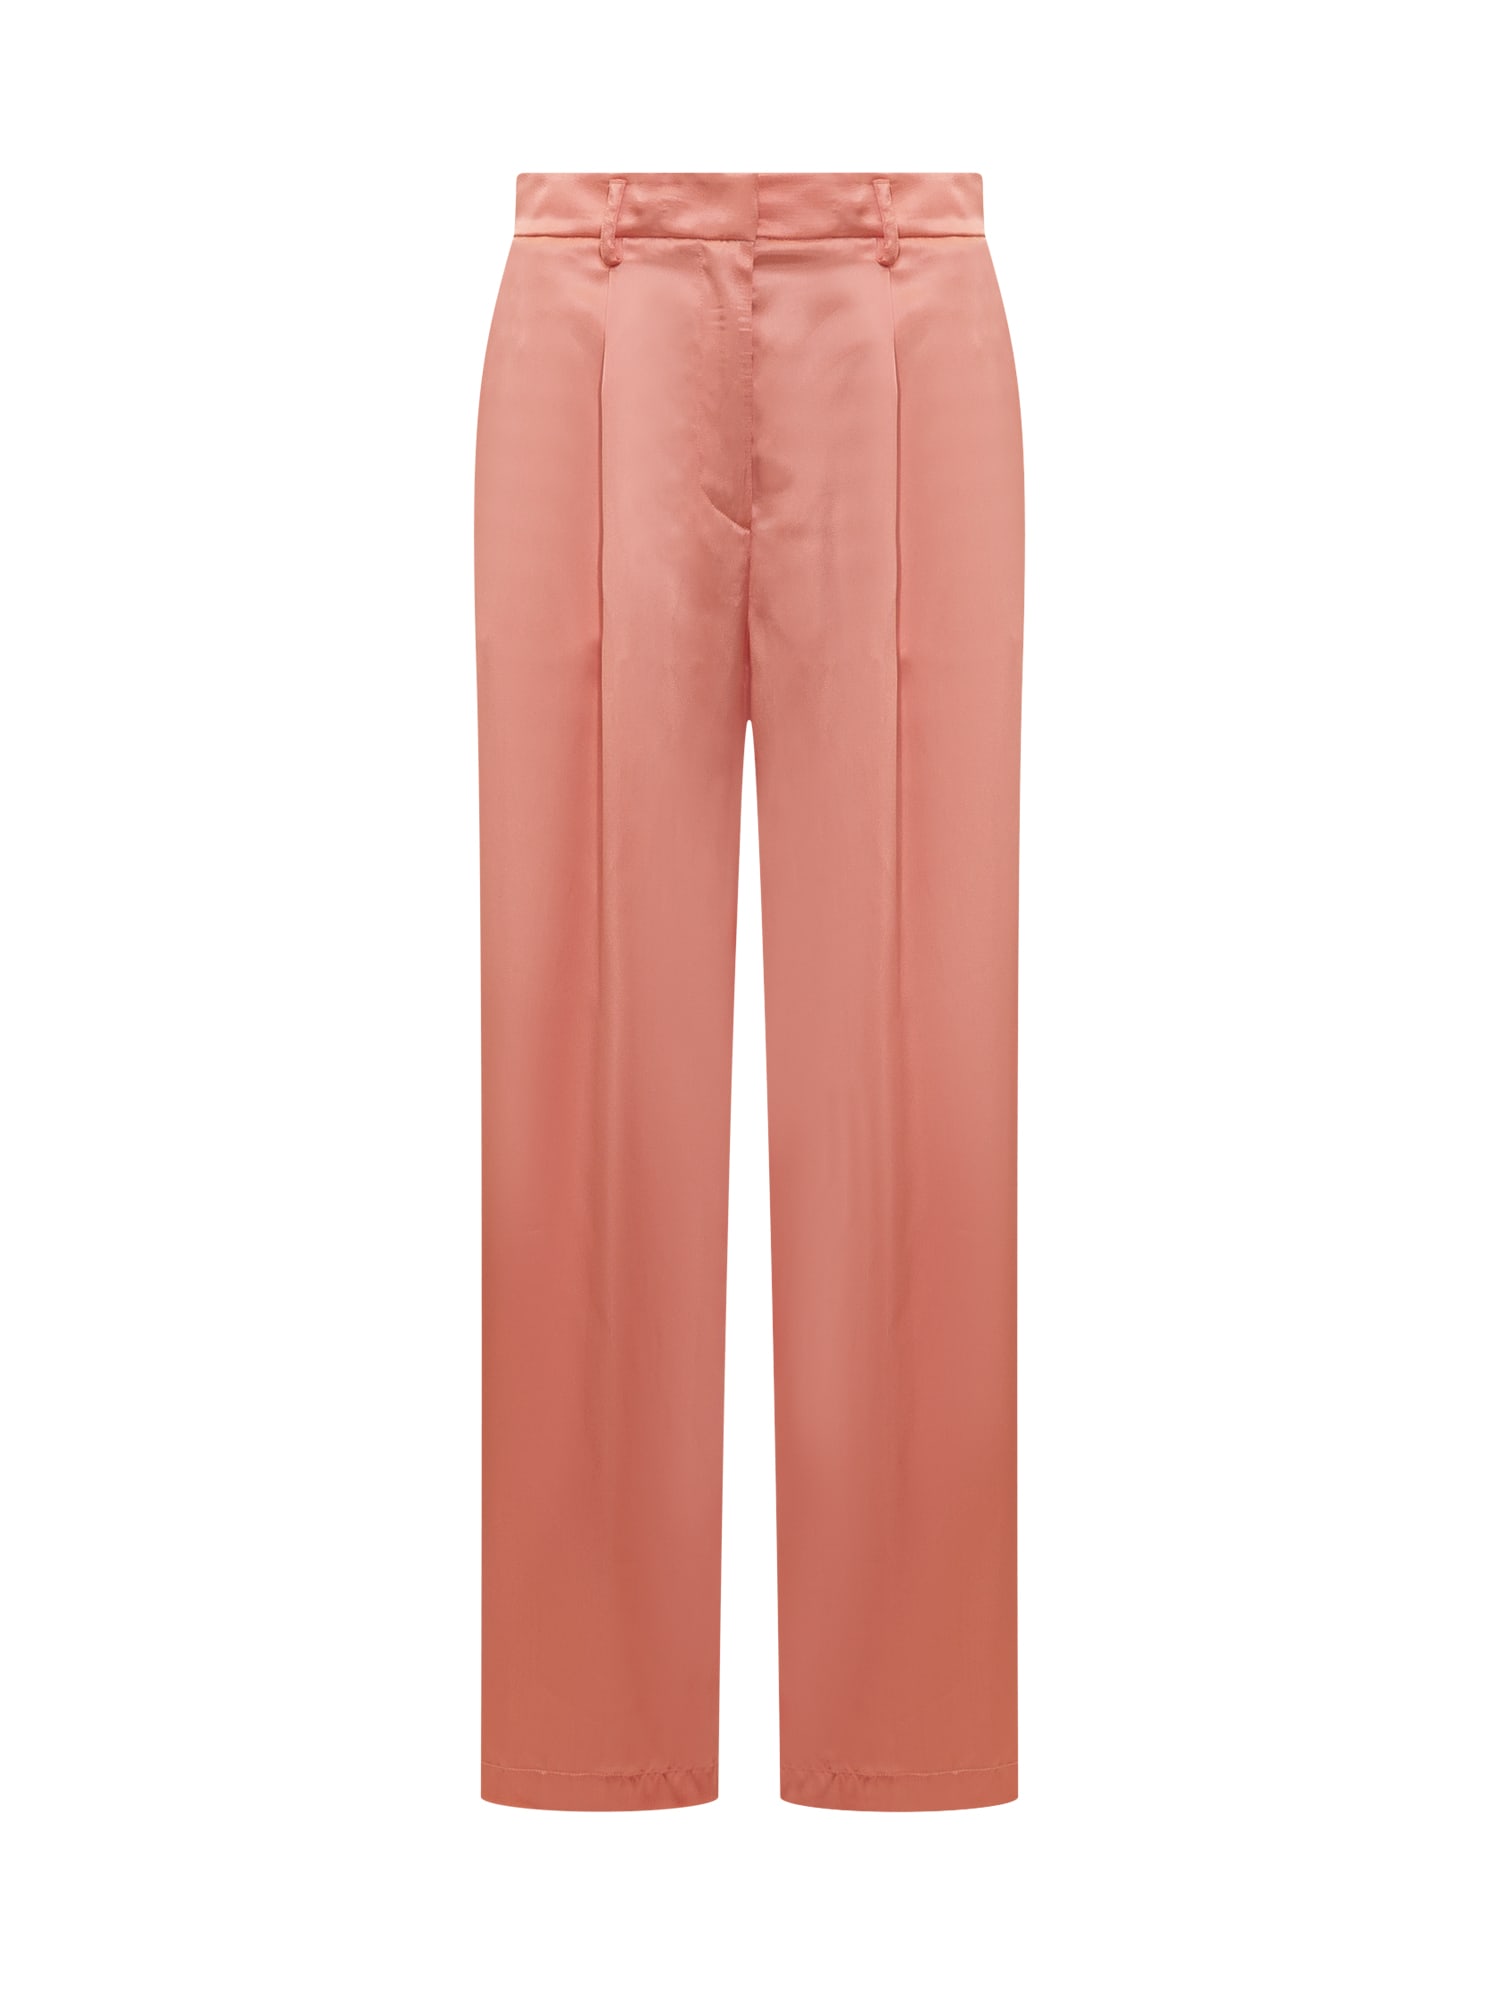 Forte Forte High Waist Pants In Peach Pink